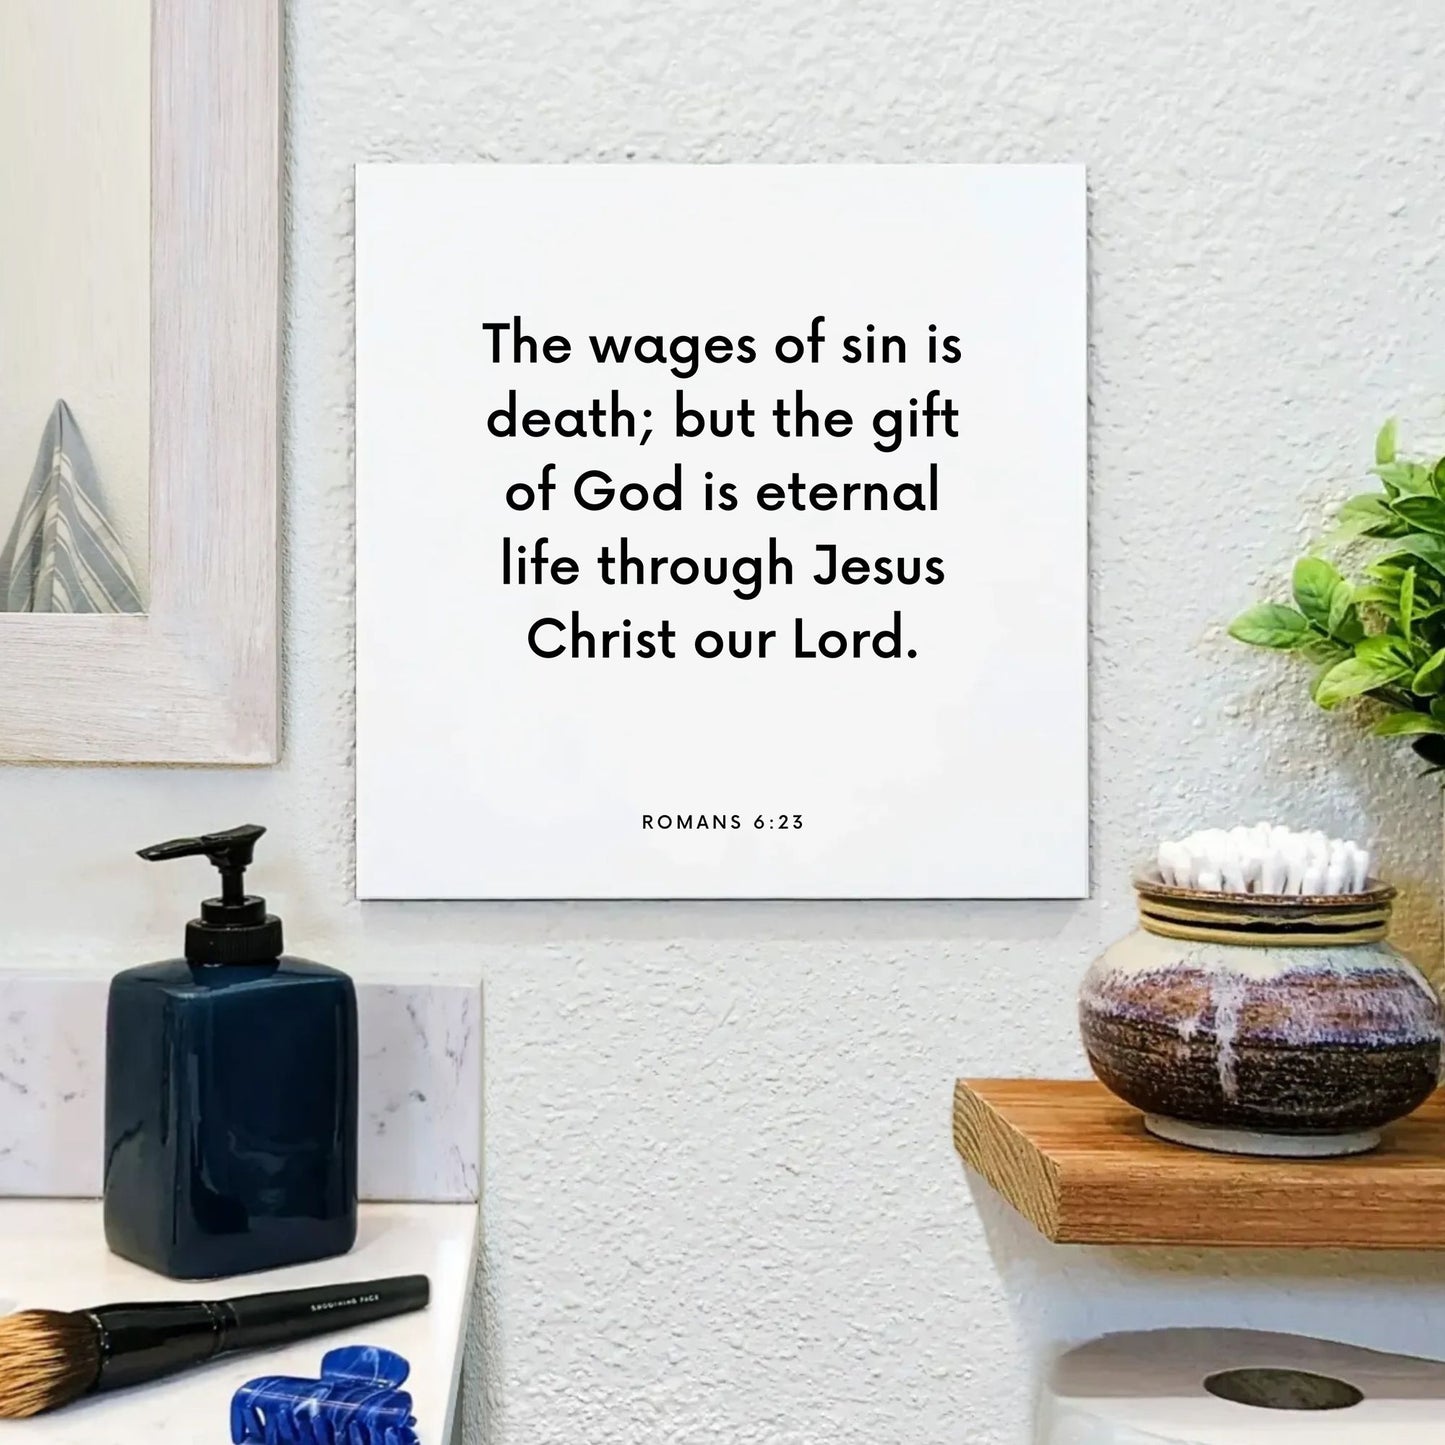 Bathroom mouting of the scripture tile for Romans 6:23 - "The wages of sin is death but the gift of God is eternal life"